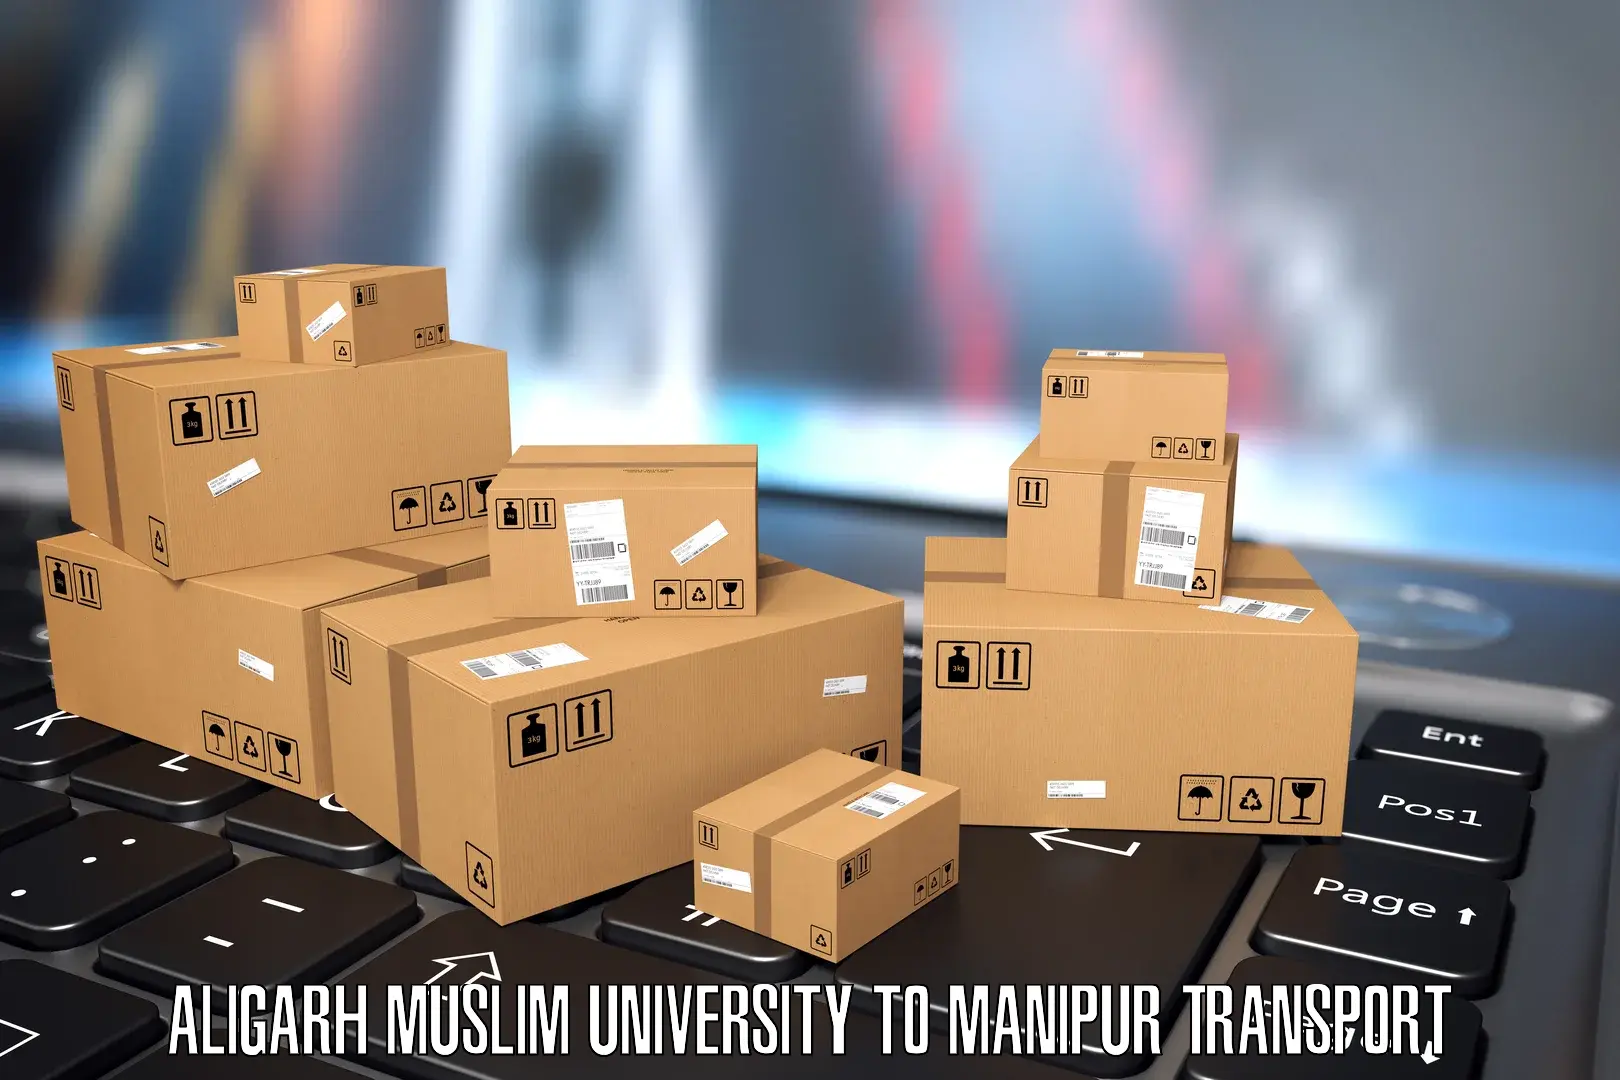 Container transport service Aligarh Muslim University to Imphal